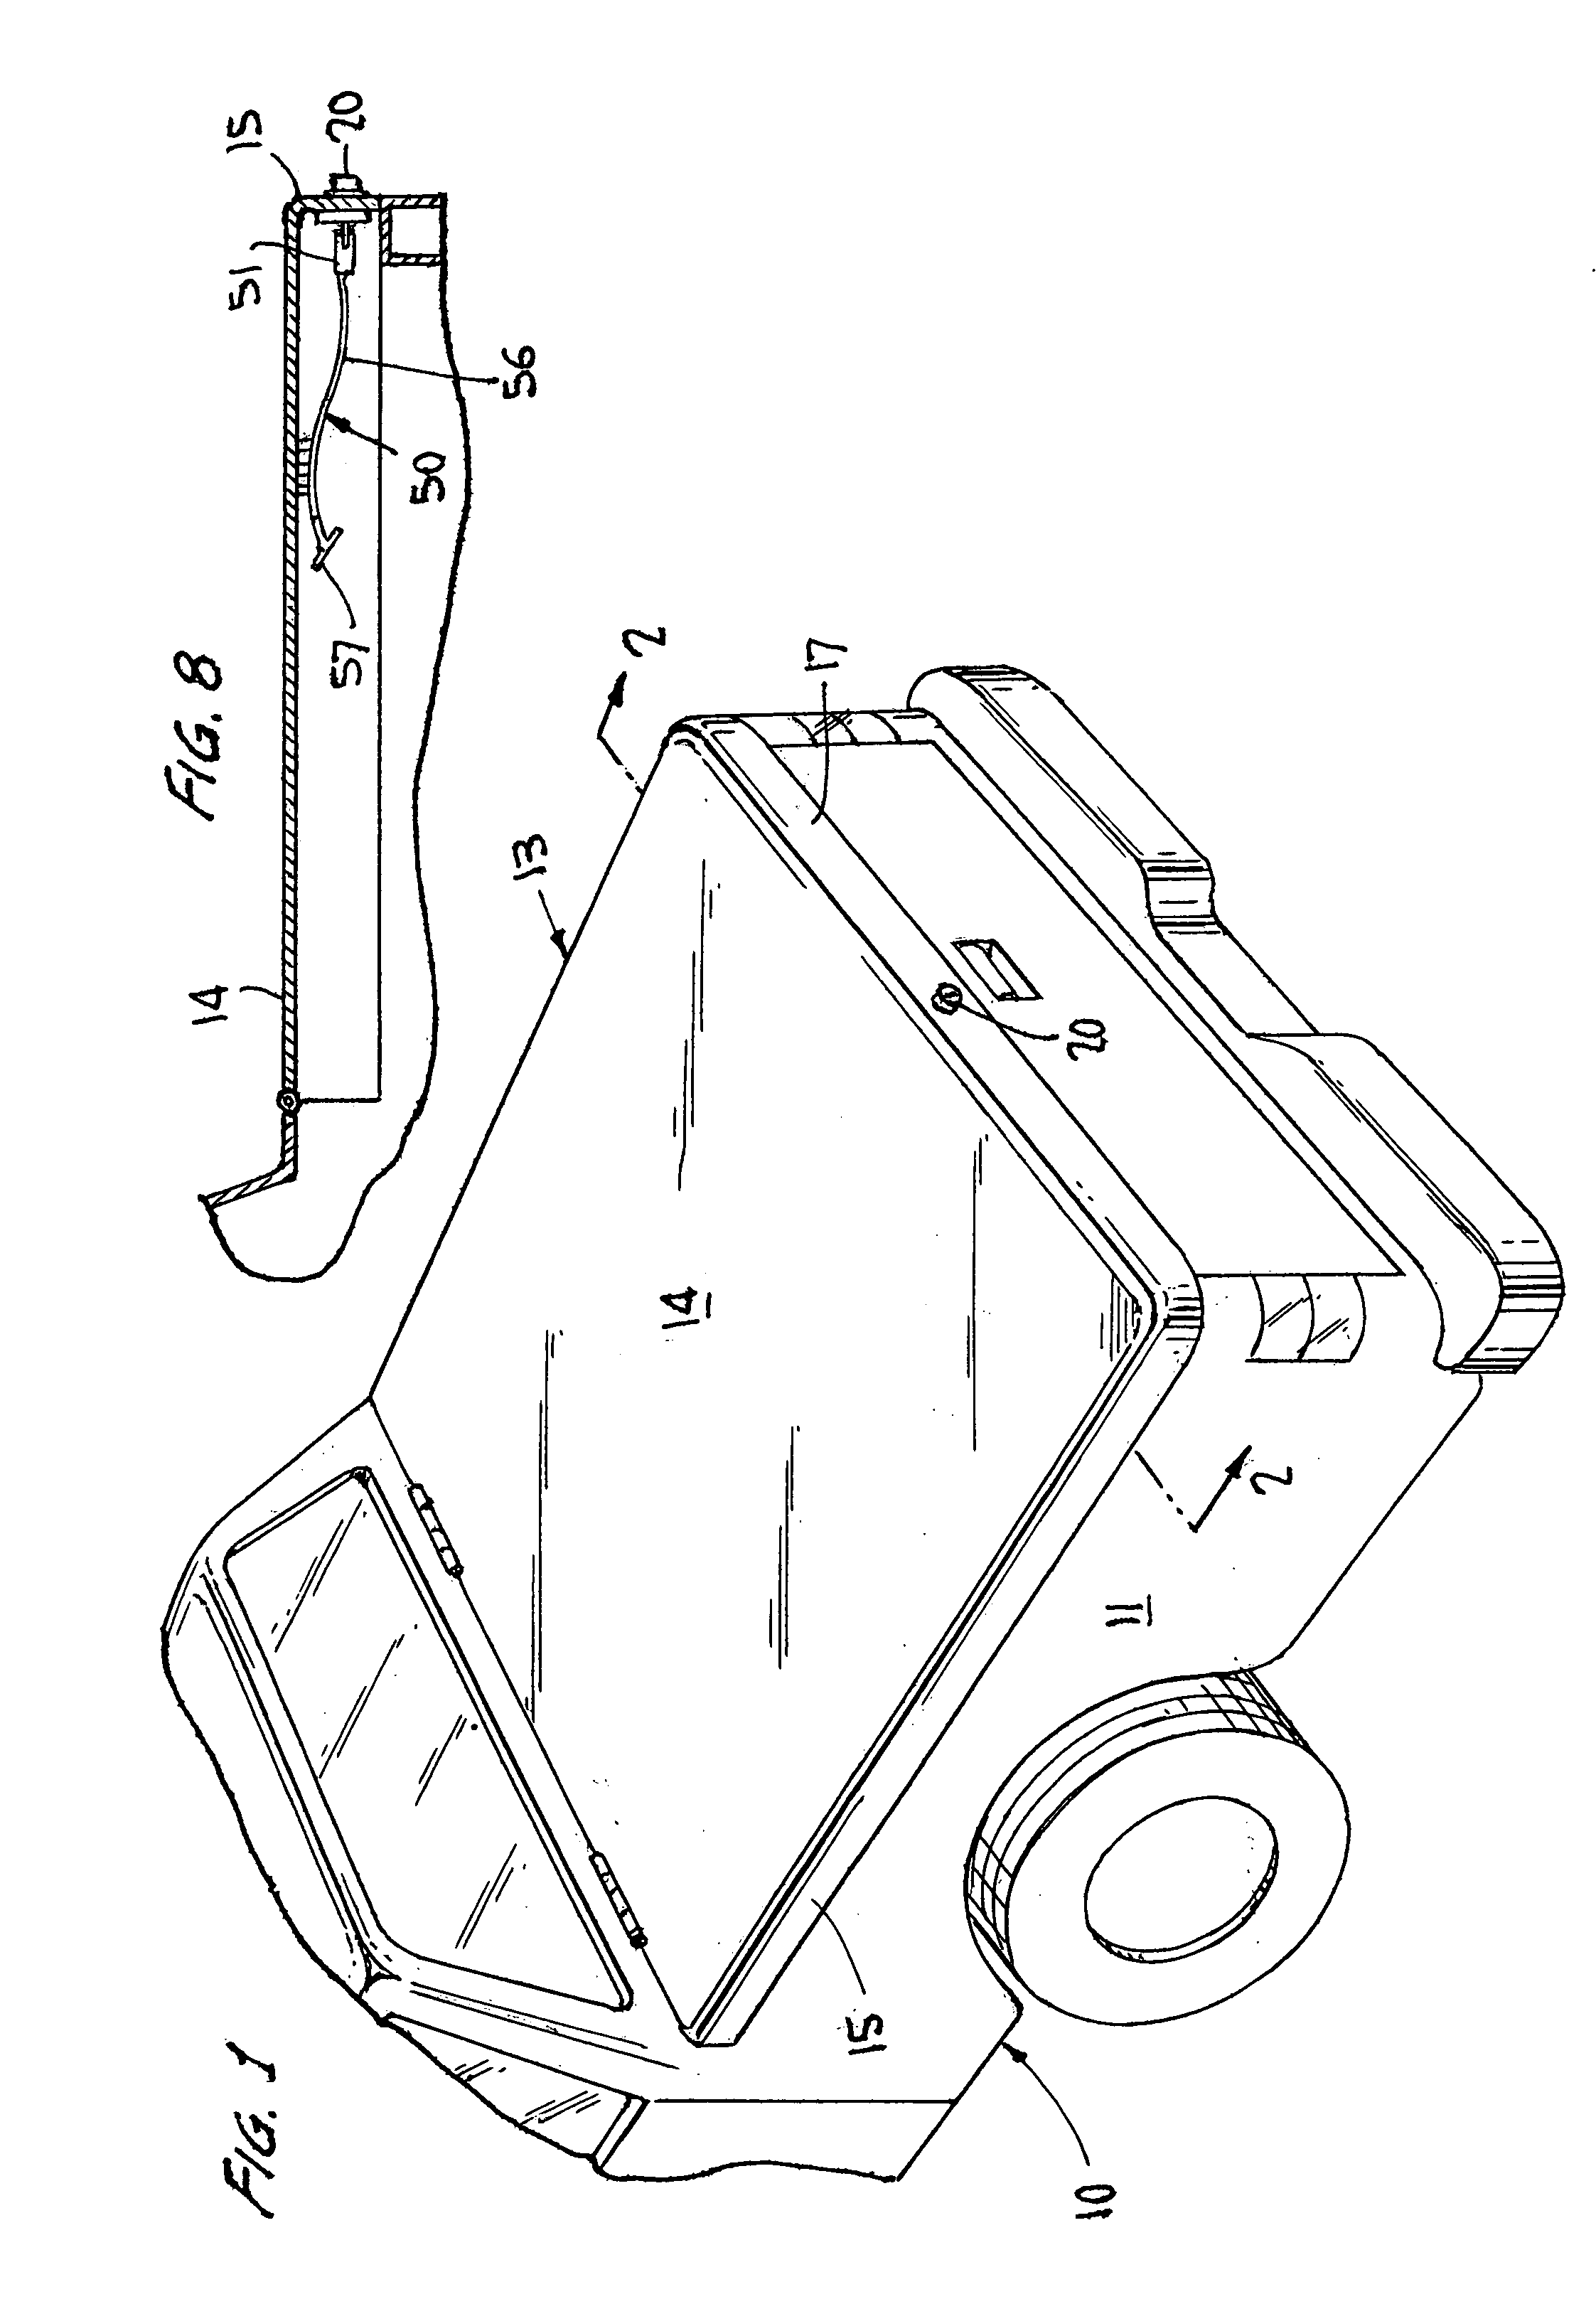 Push button latch release assembly